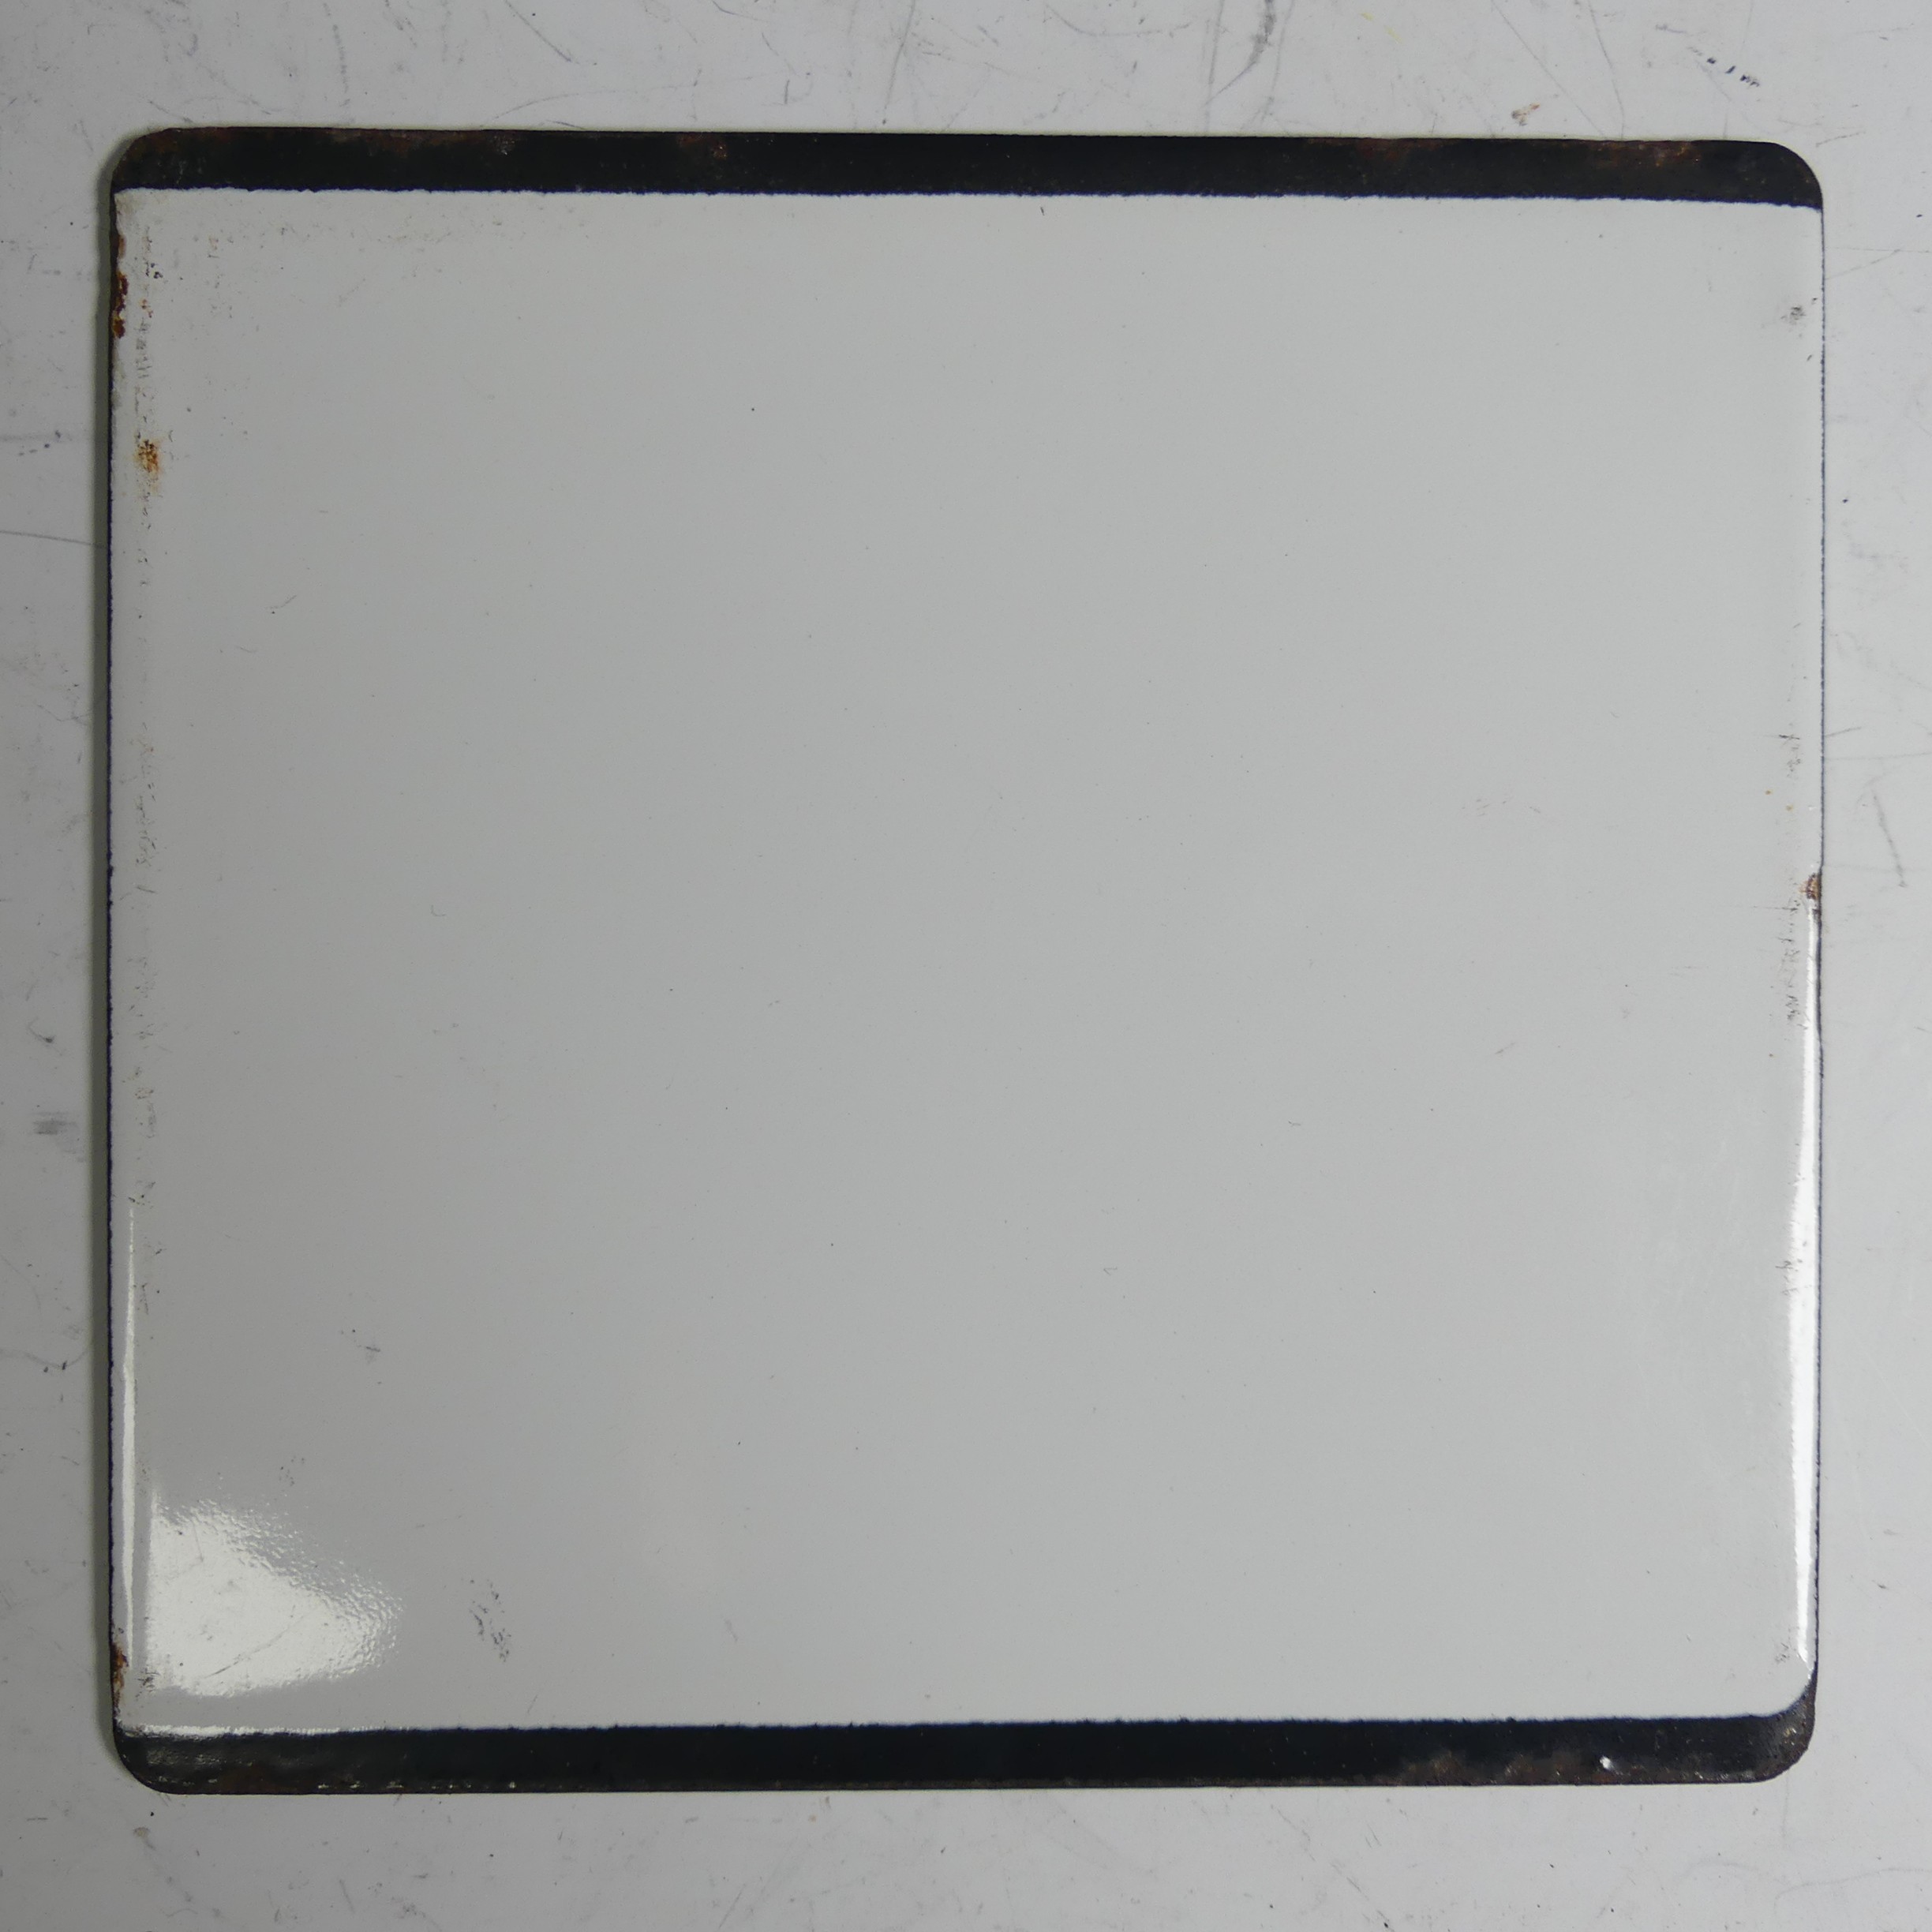 Bus and Coaching Memorabilia; A London Transport enamel Bus Stop E-Plate, Route No. 801 with - Image 2 of 2